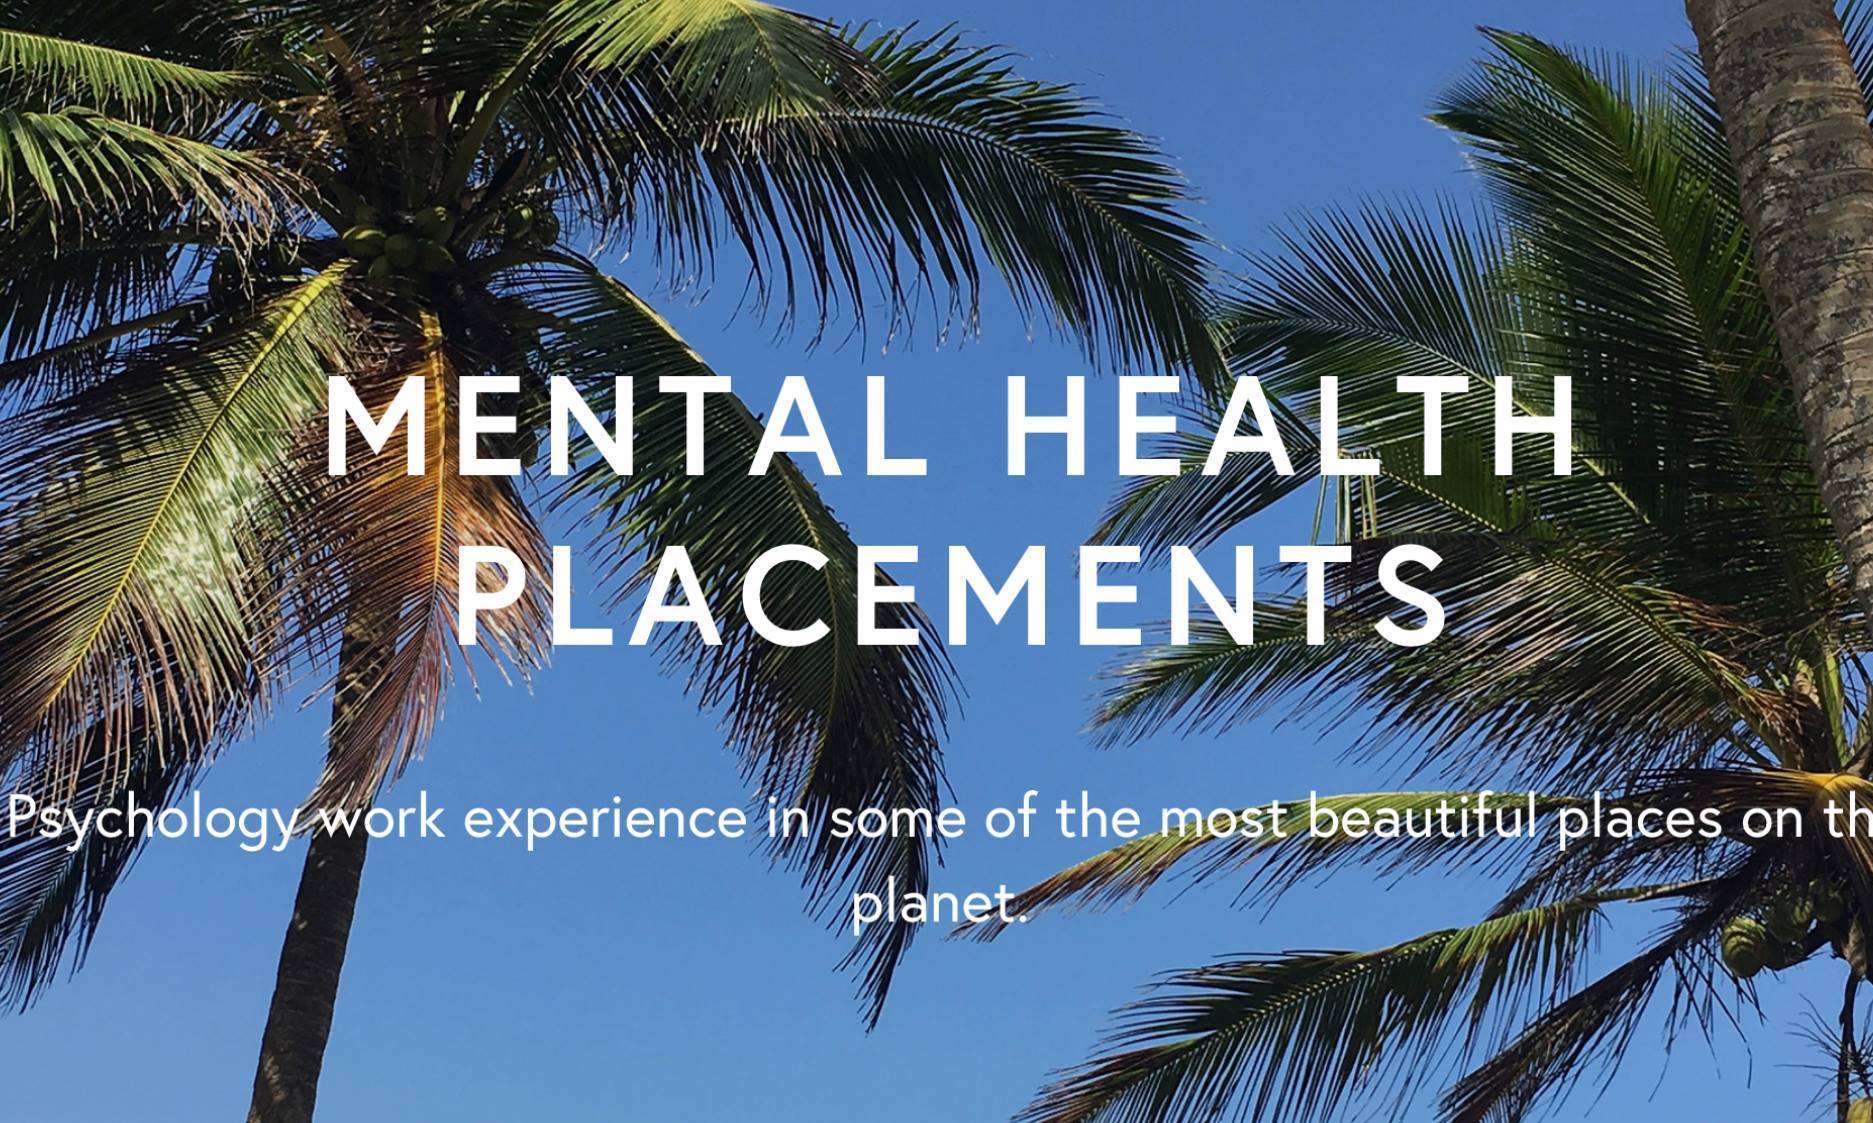 My Mental Health Placement in Sri Lanka!